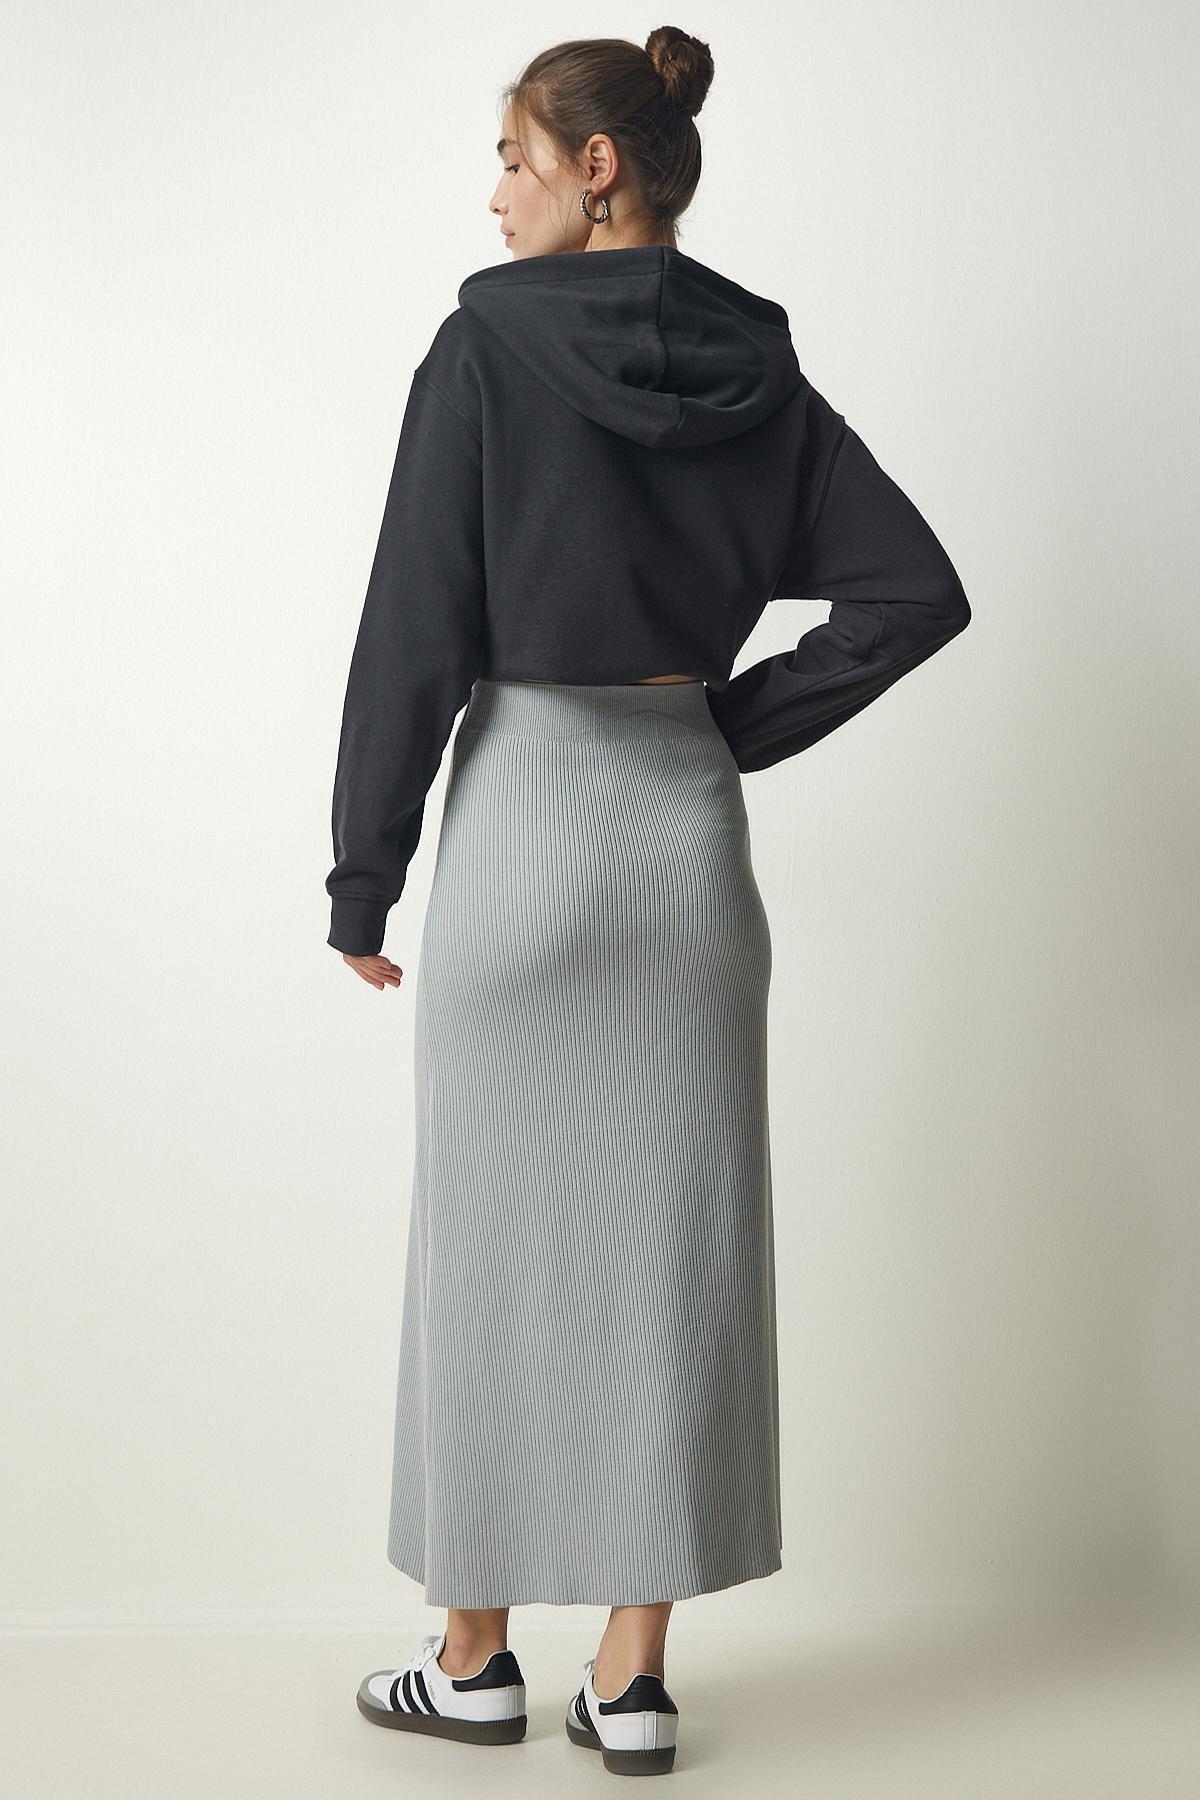 Happiness Istanbul - Grey Ribbed Knitwear Skirt